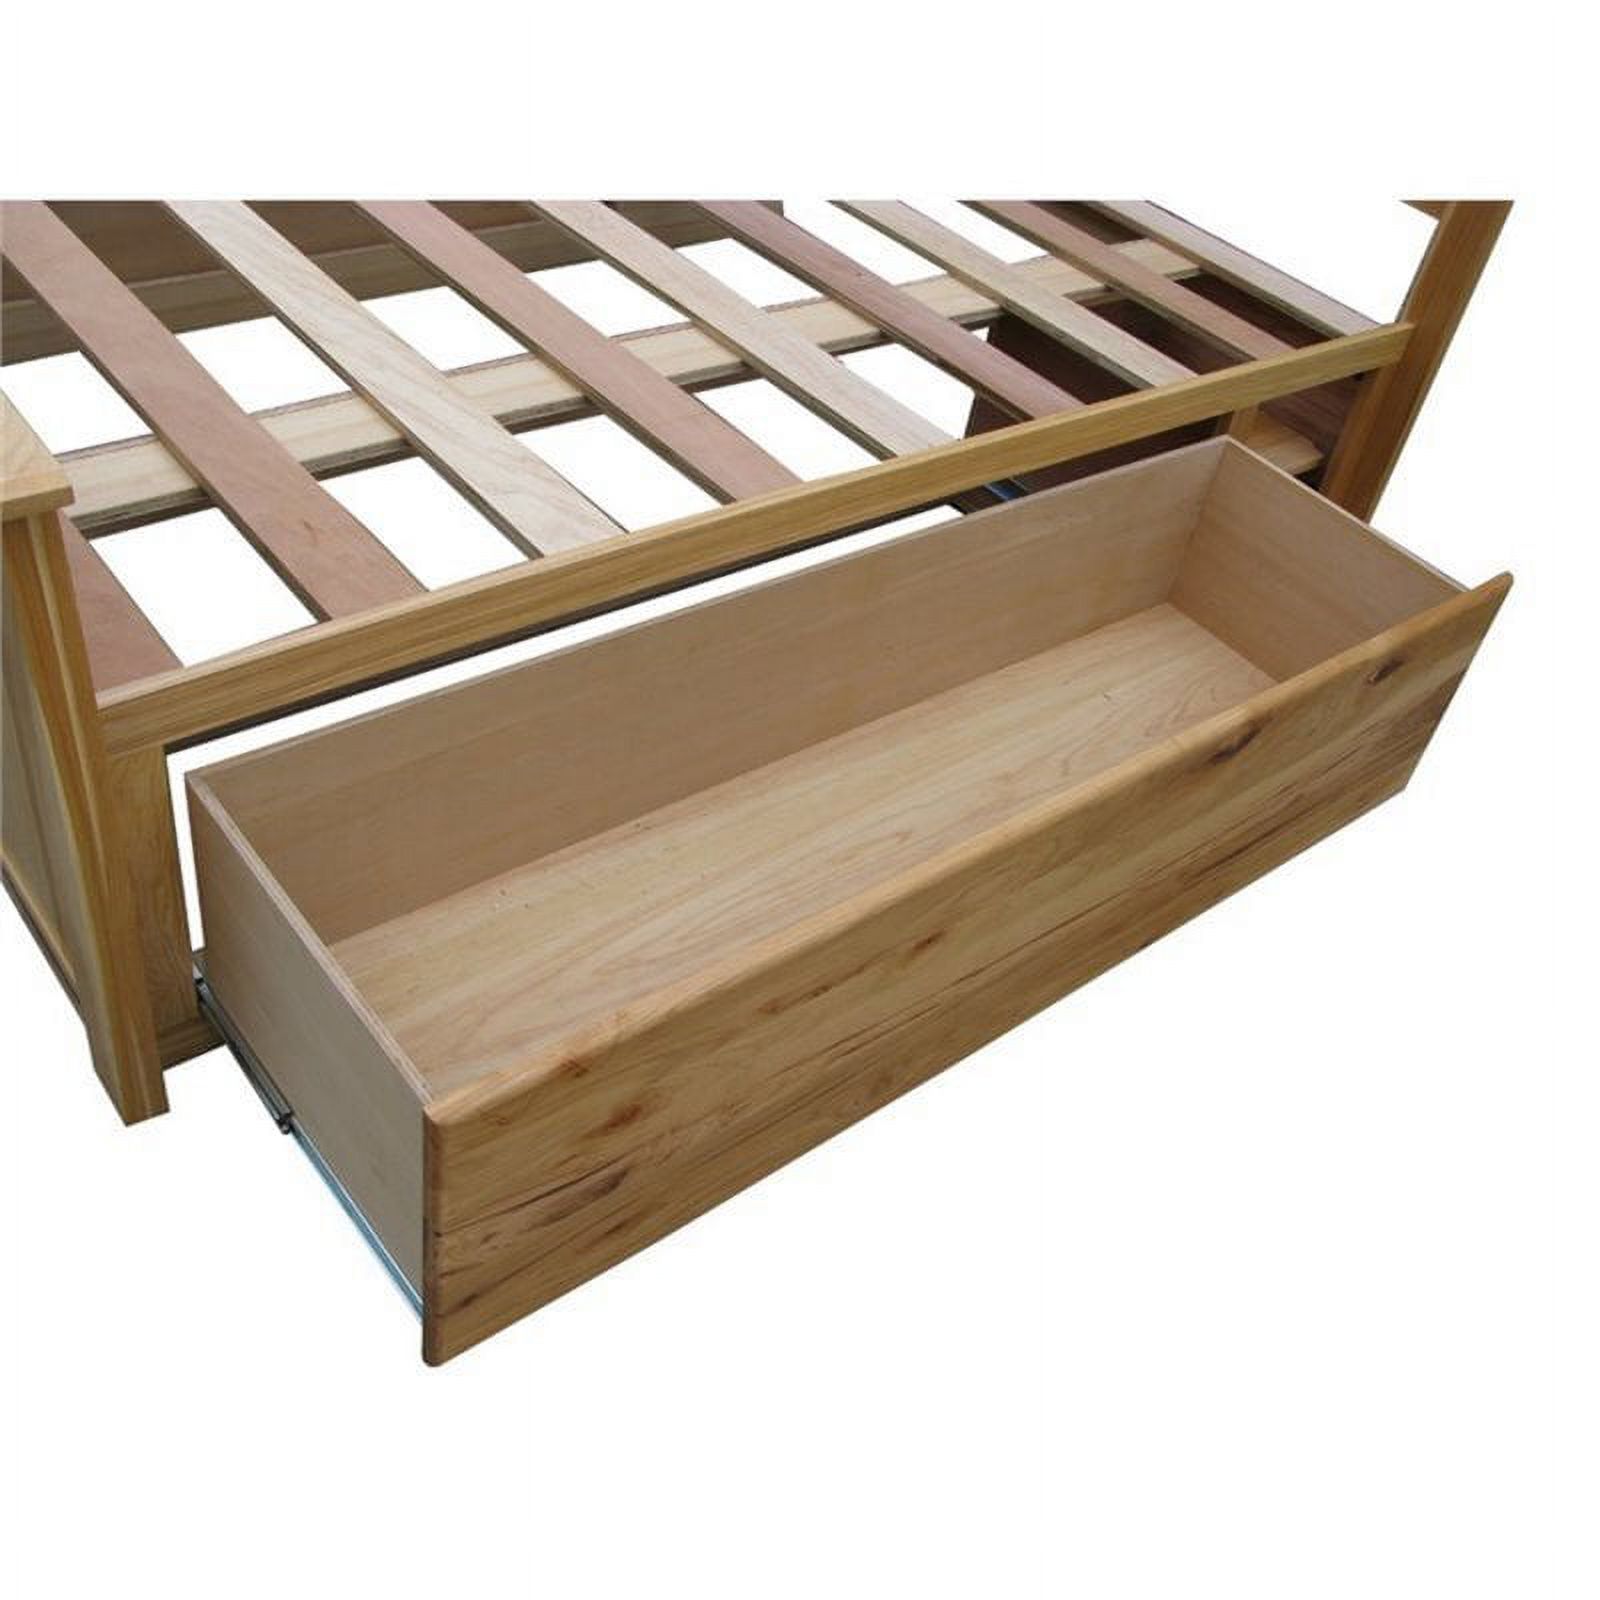 A-America Adamstown Queen Storage Bed in Natural - image 2 of 4